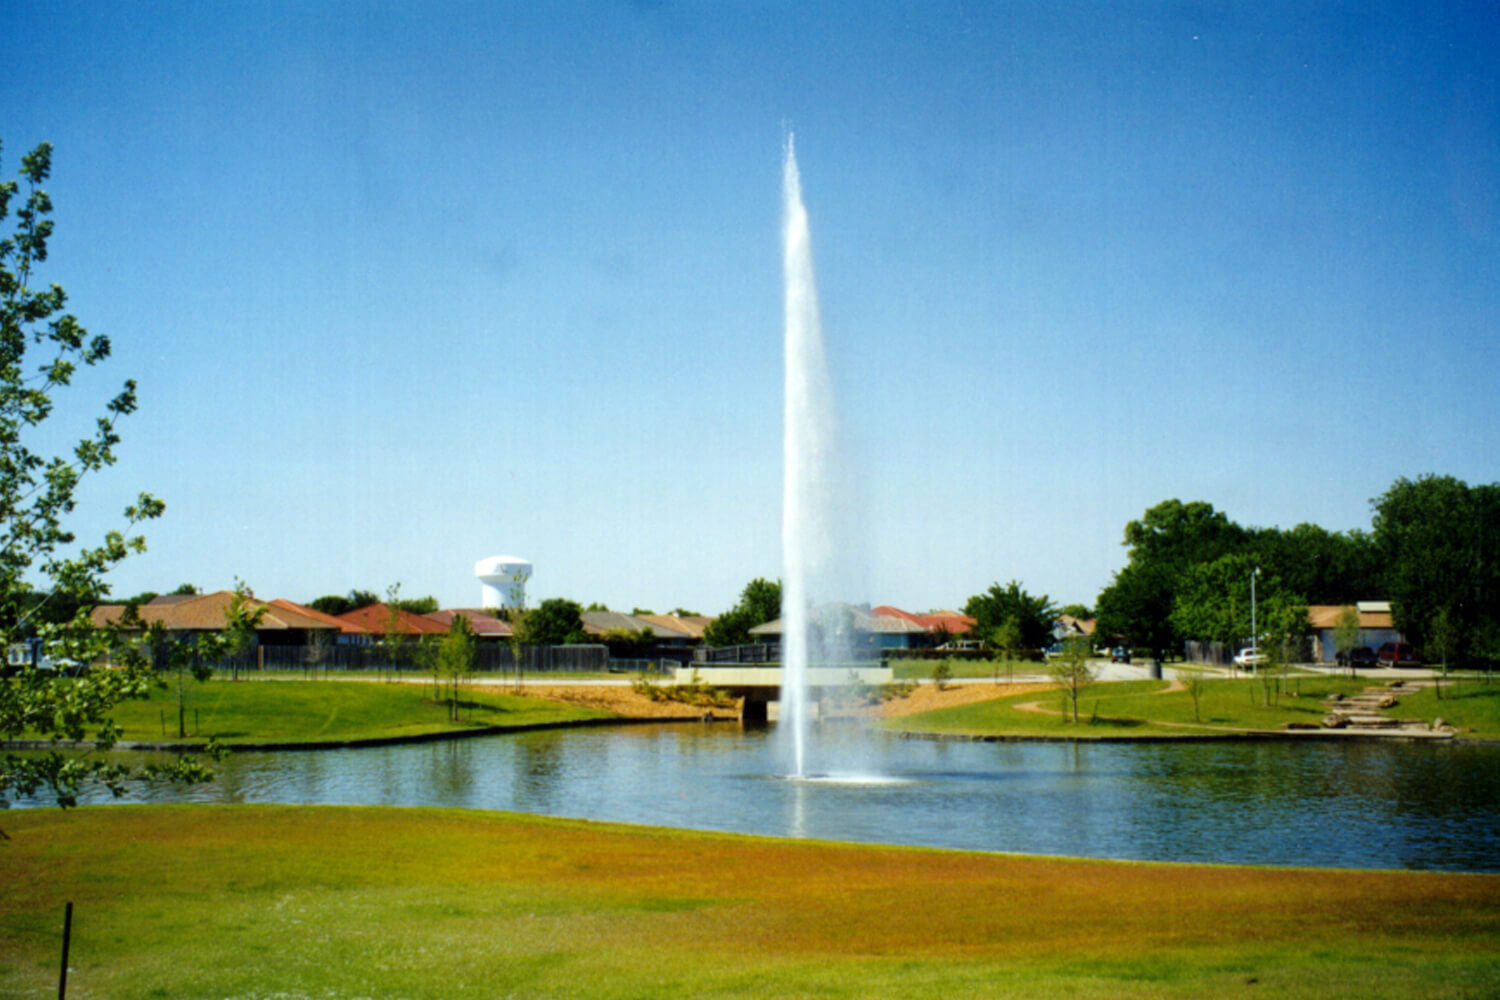 One of Otterbine's Mystic Aerating Fountains